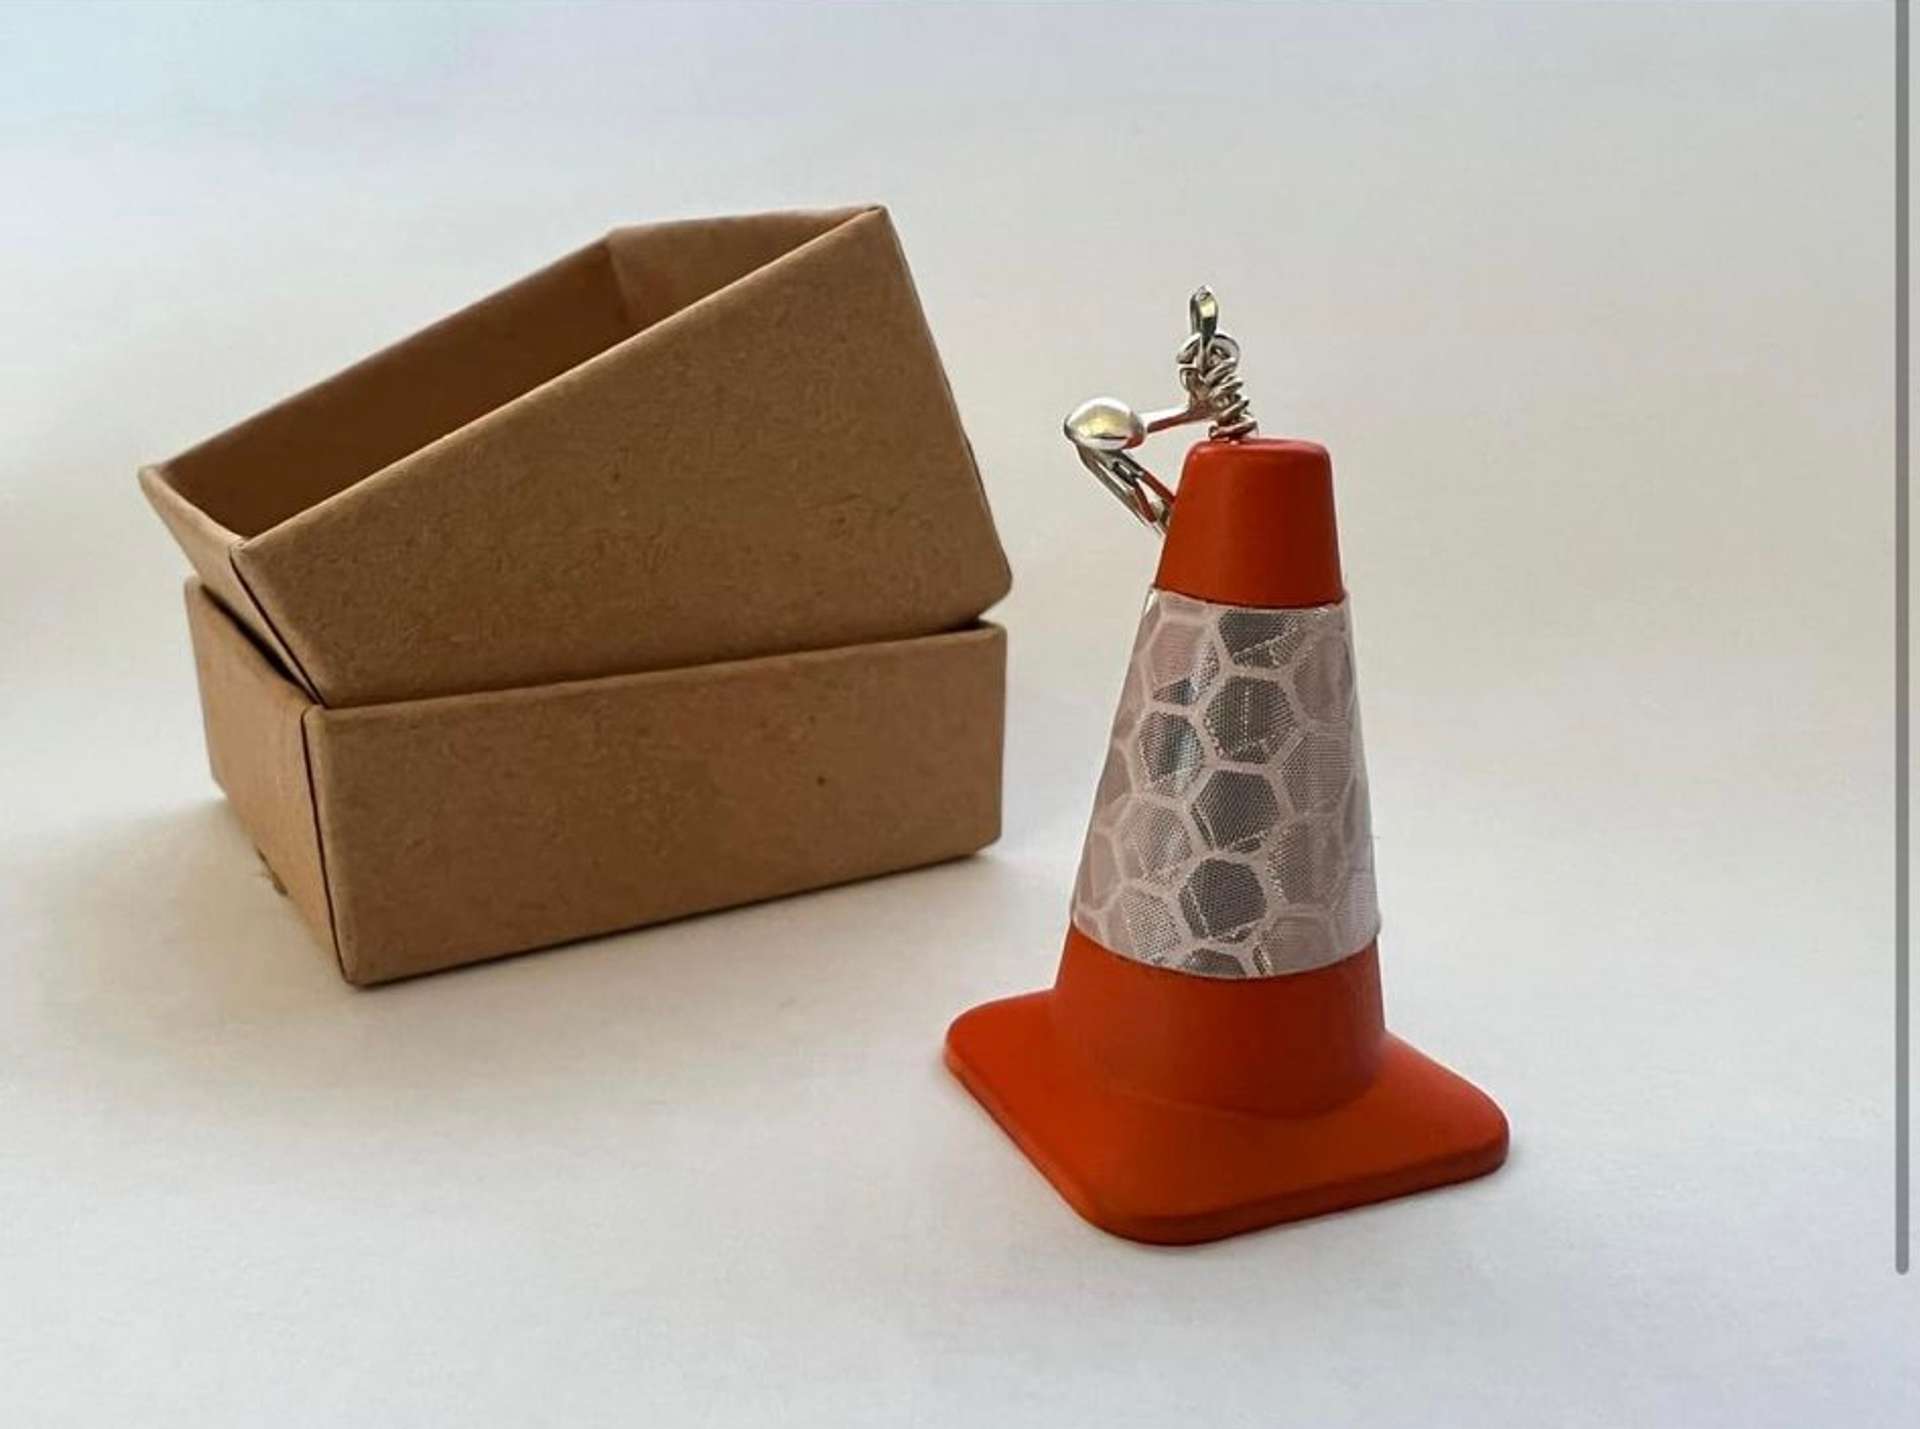 A photograph of a novelty earring in the shape of an orange traffic cone, next to a small box